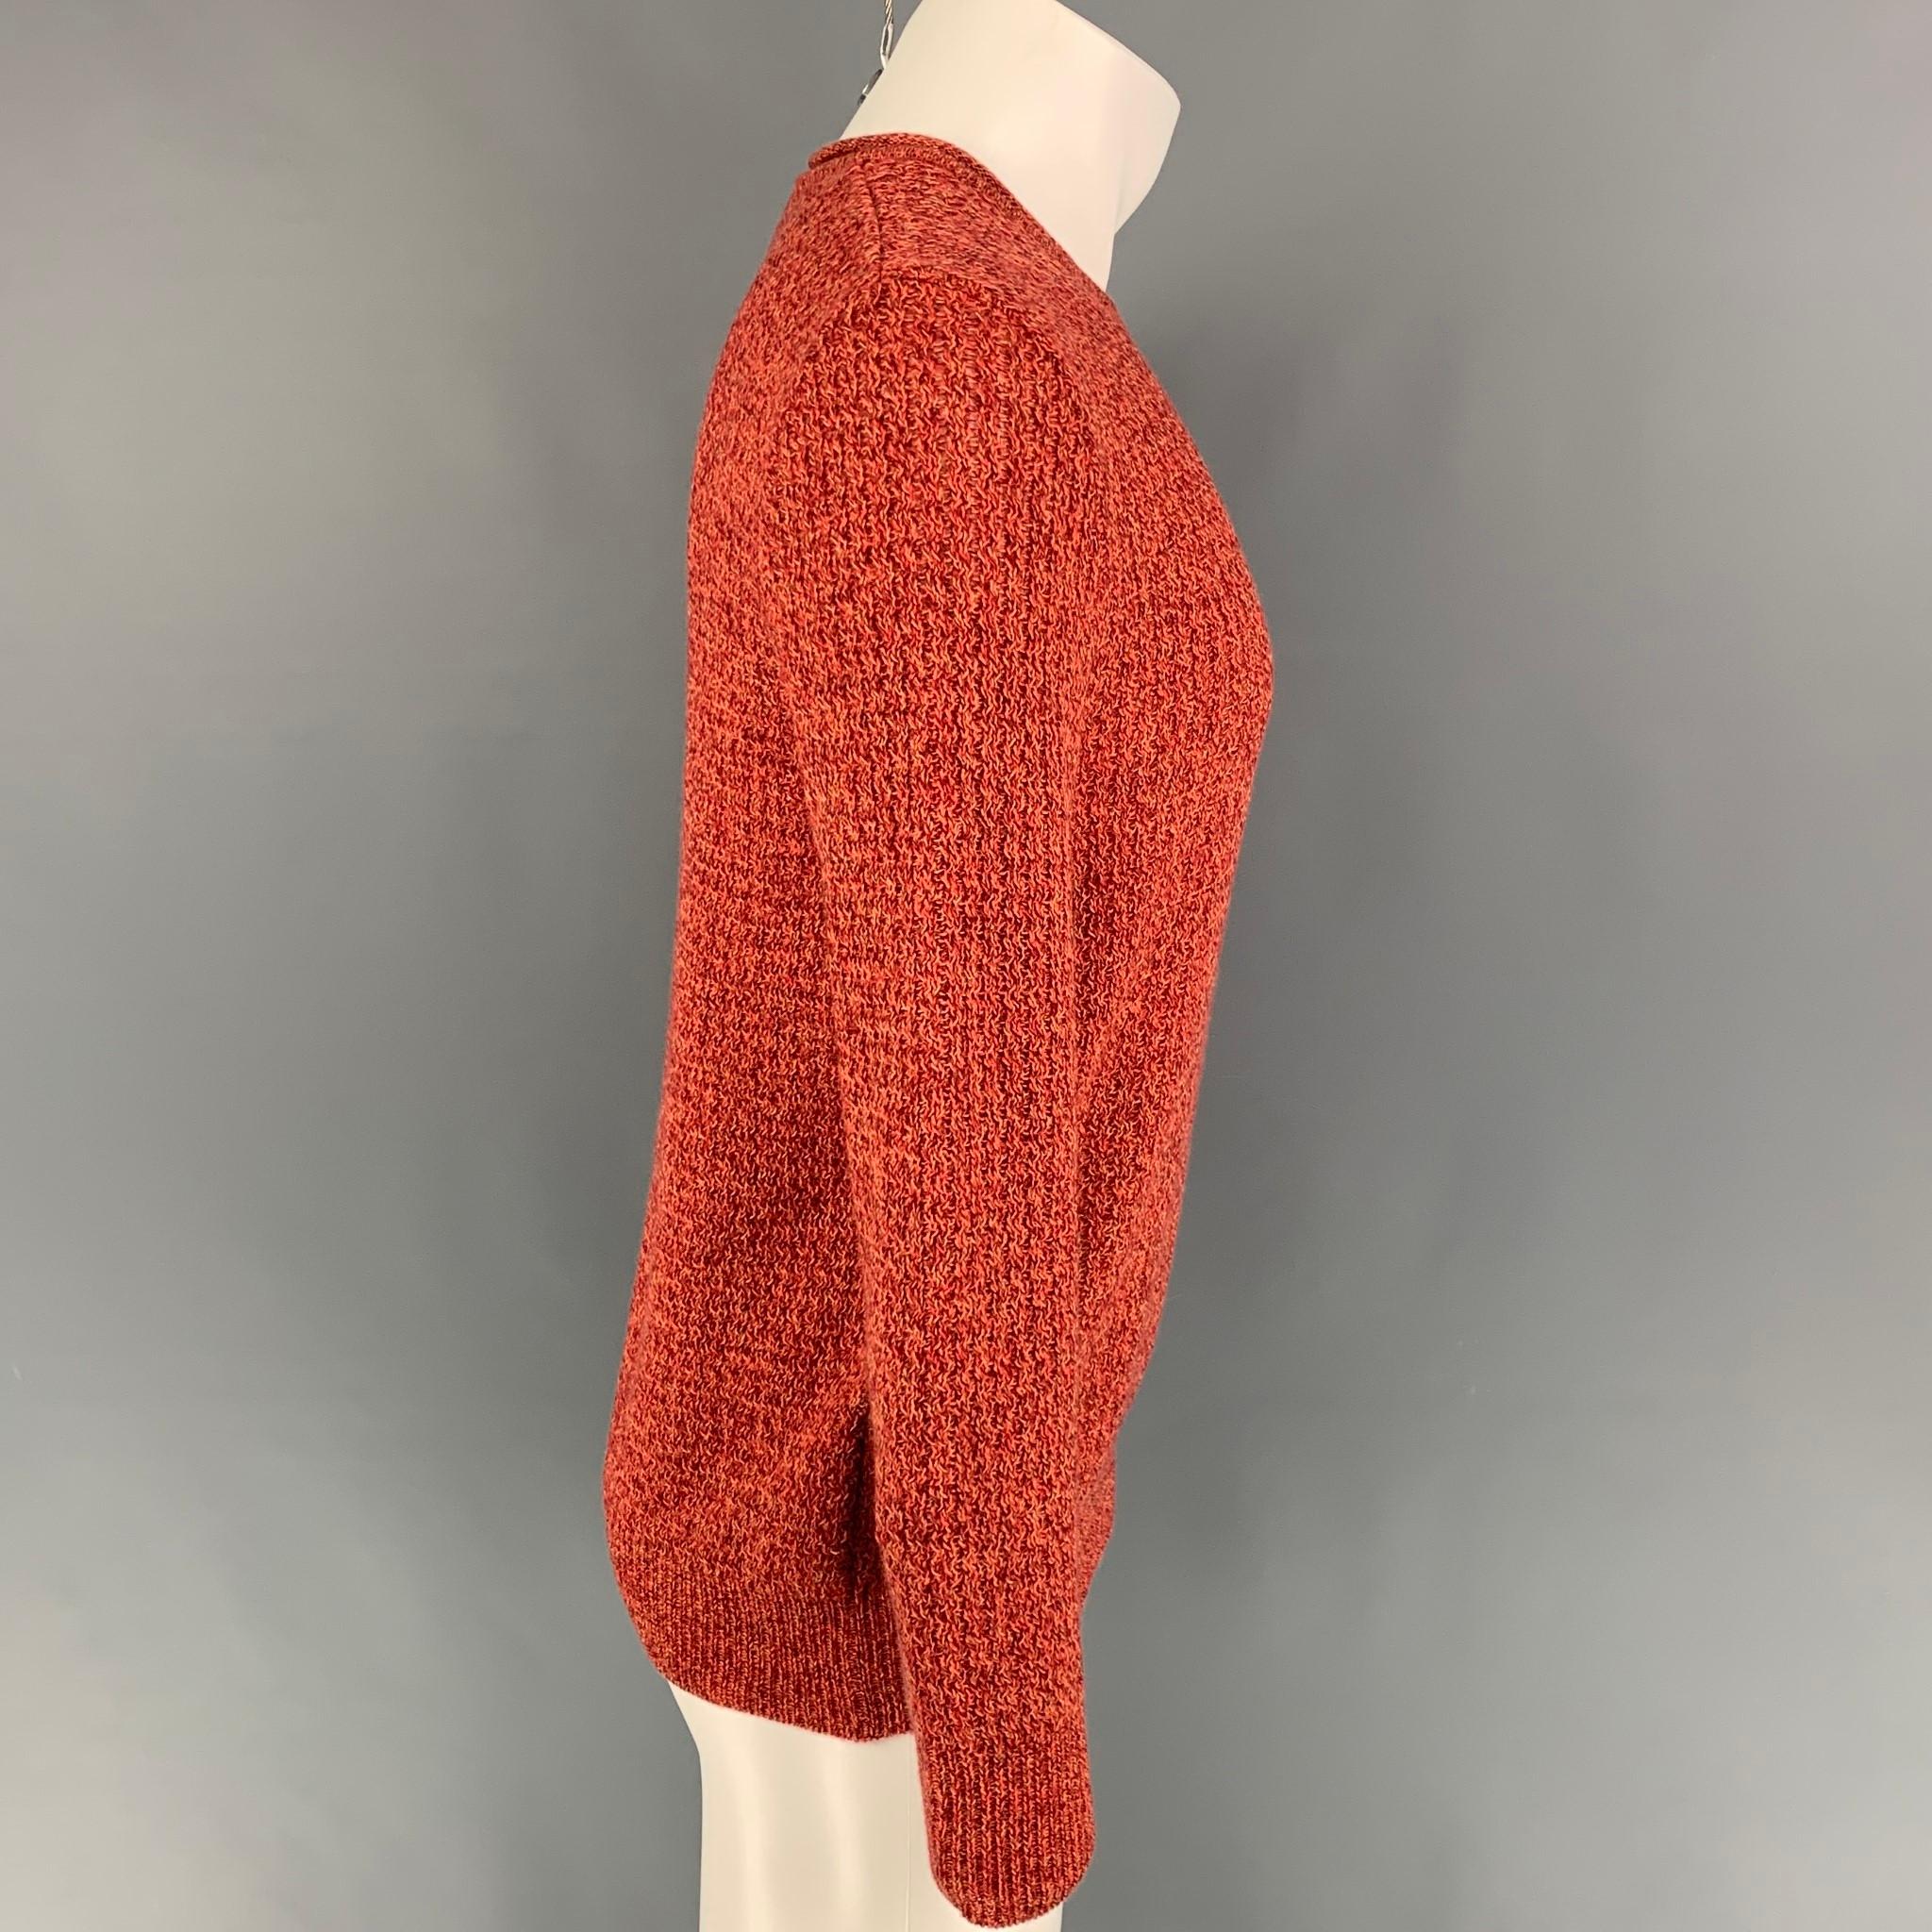 ISSEY MIYAKE pullover comes in a red & orange knitted material featuring a crew-neck. Made in Japan. 

Very Good Pre-Owned Condition.
Marked: JP 2

Measurements:

Shoulder: 18.5 in.
Chest: 42 in.
Sleeve: 25.5 in.
Length: 25.5 in. 